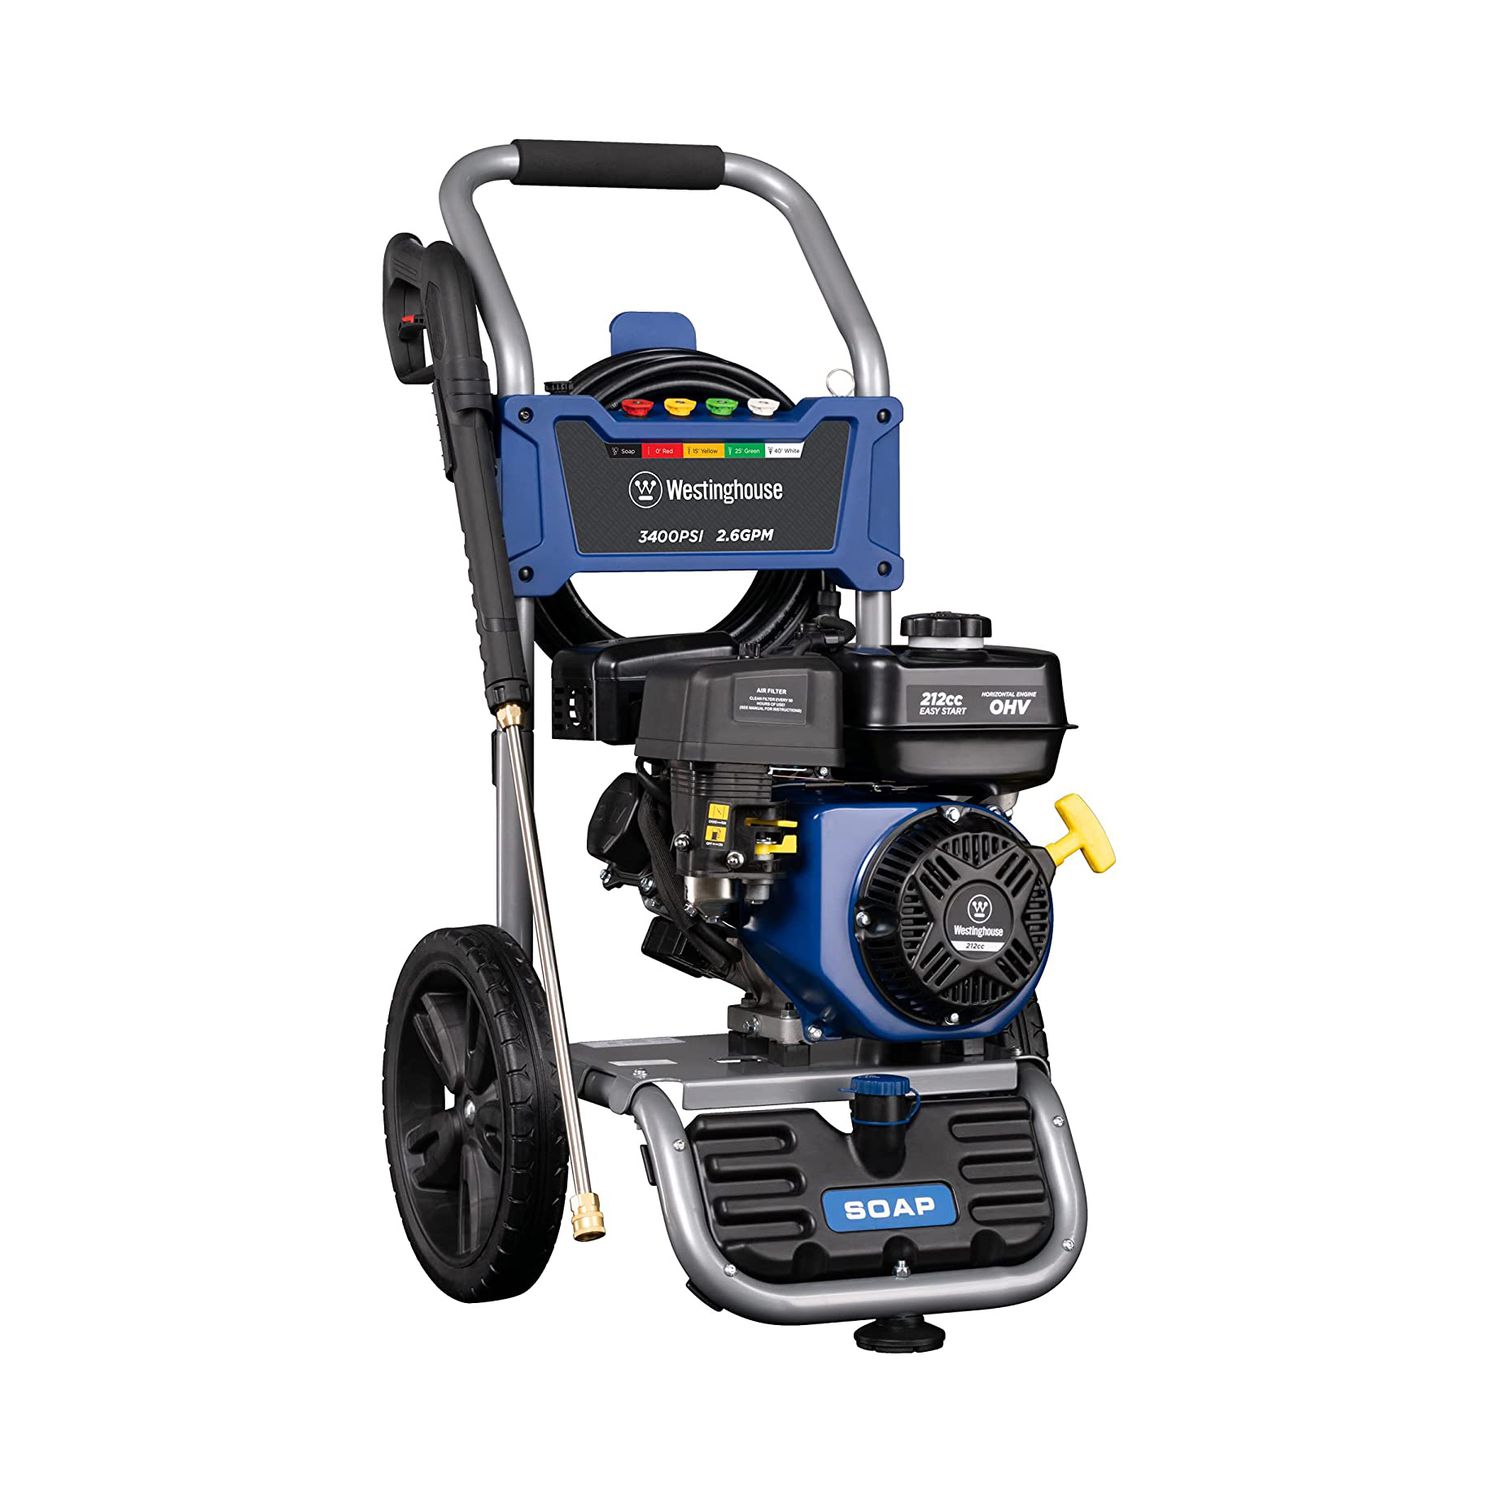 Westinghouse Outdoor Power Equipment WPX3400 Gas Powered Pressure Washer